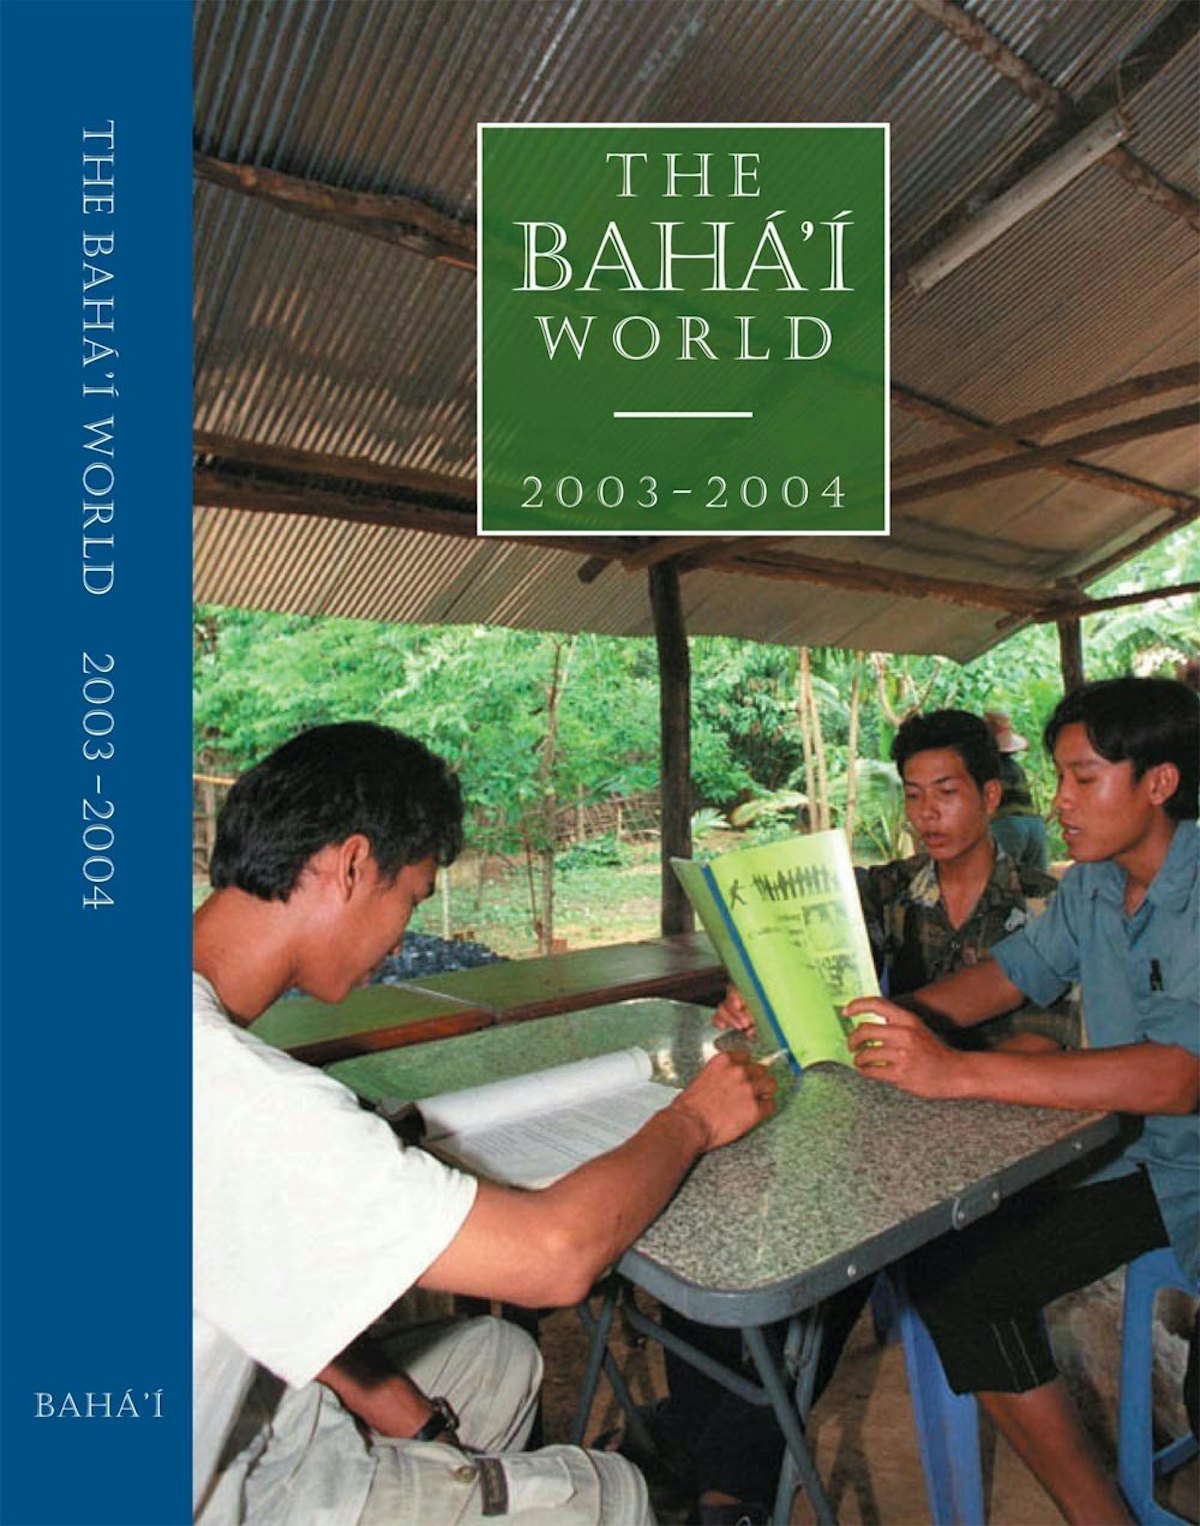 The cover of "The Baha'i World 2003-2004."